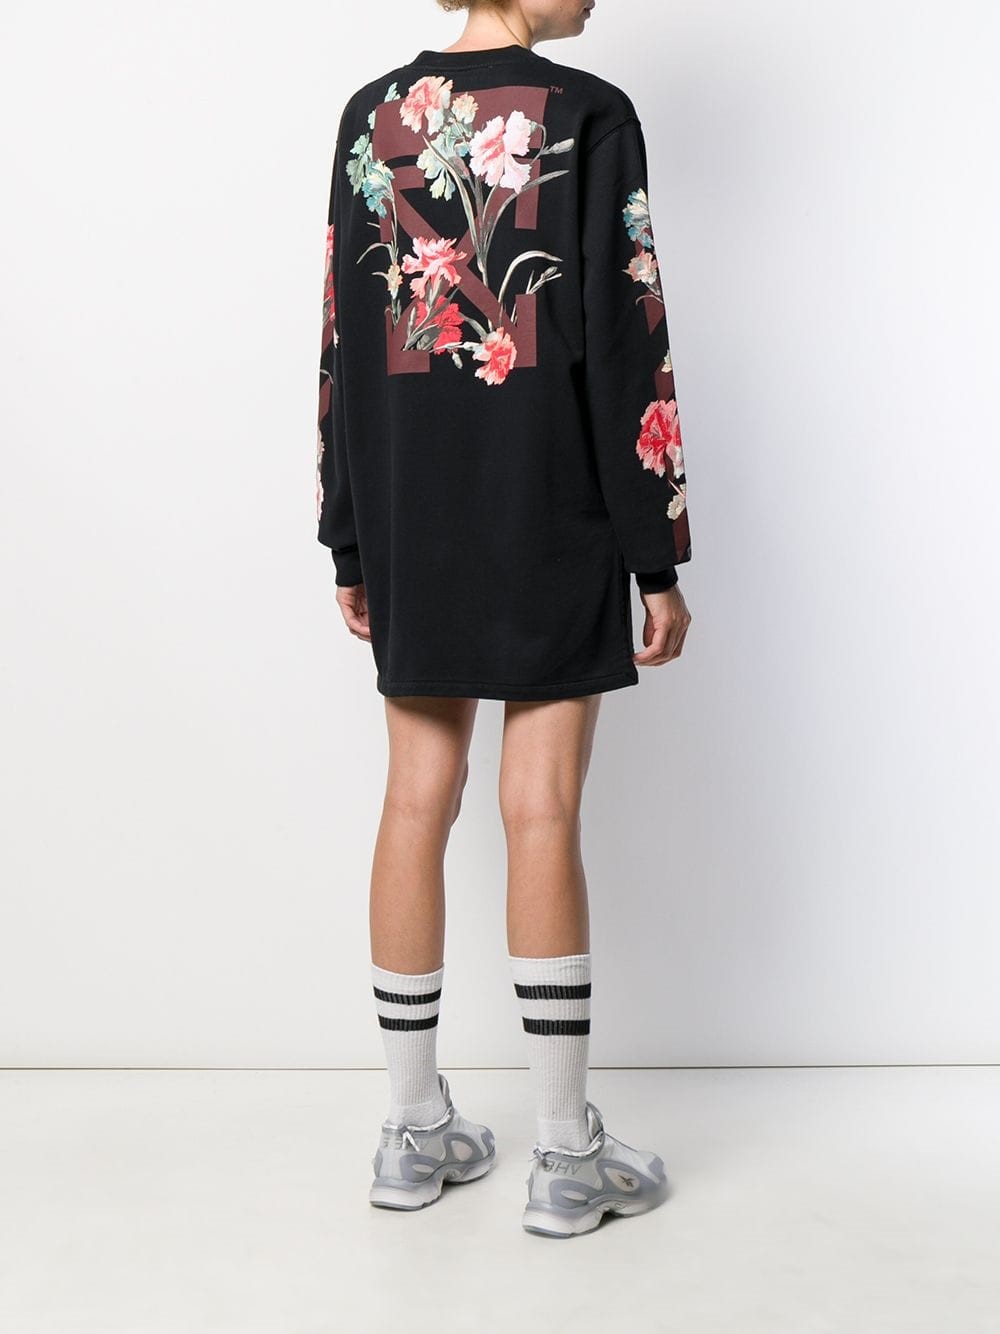 off-white FLOWER PRINT SWEATER available on montiboutique.com - 30685